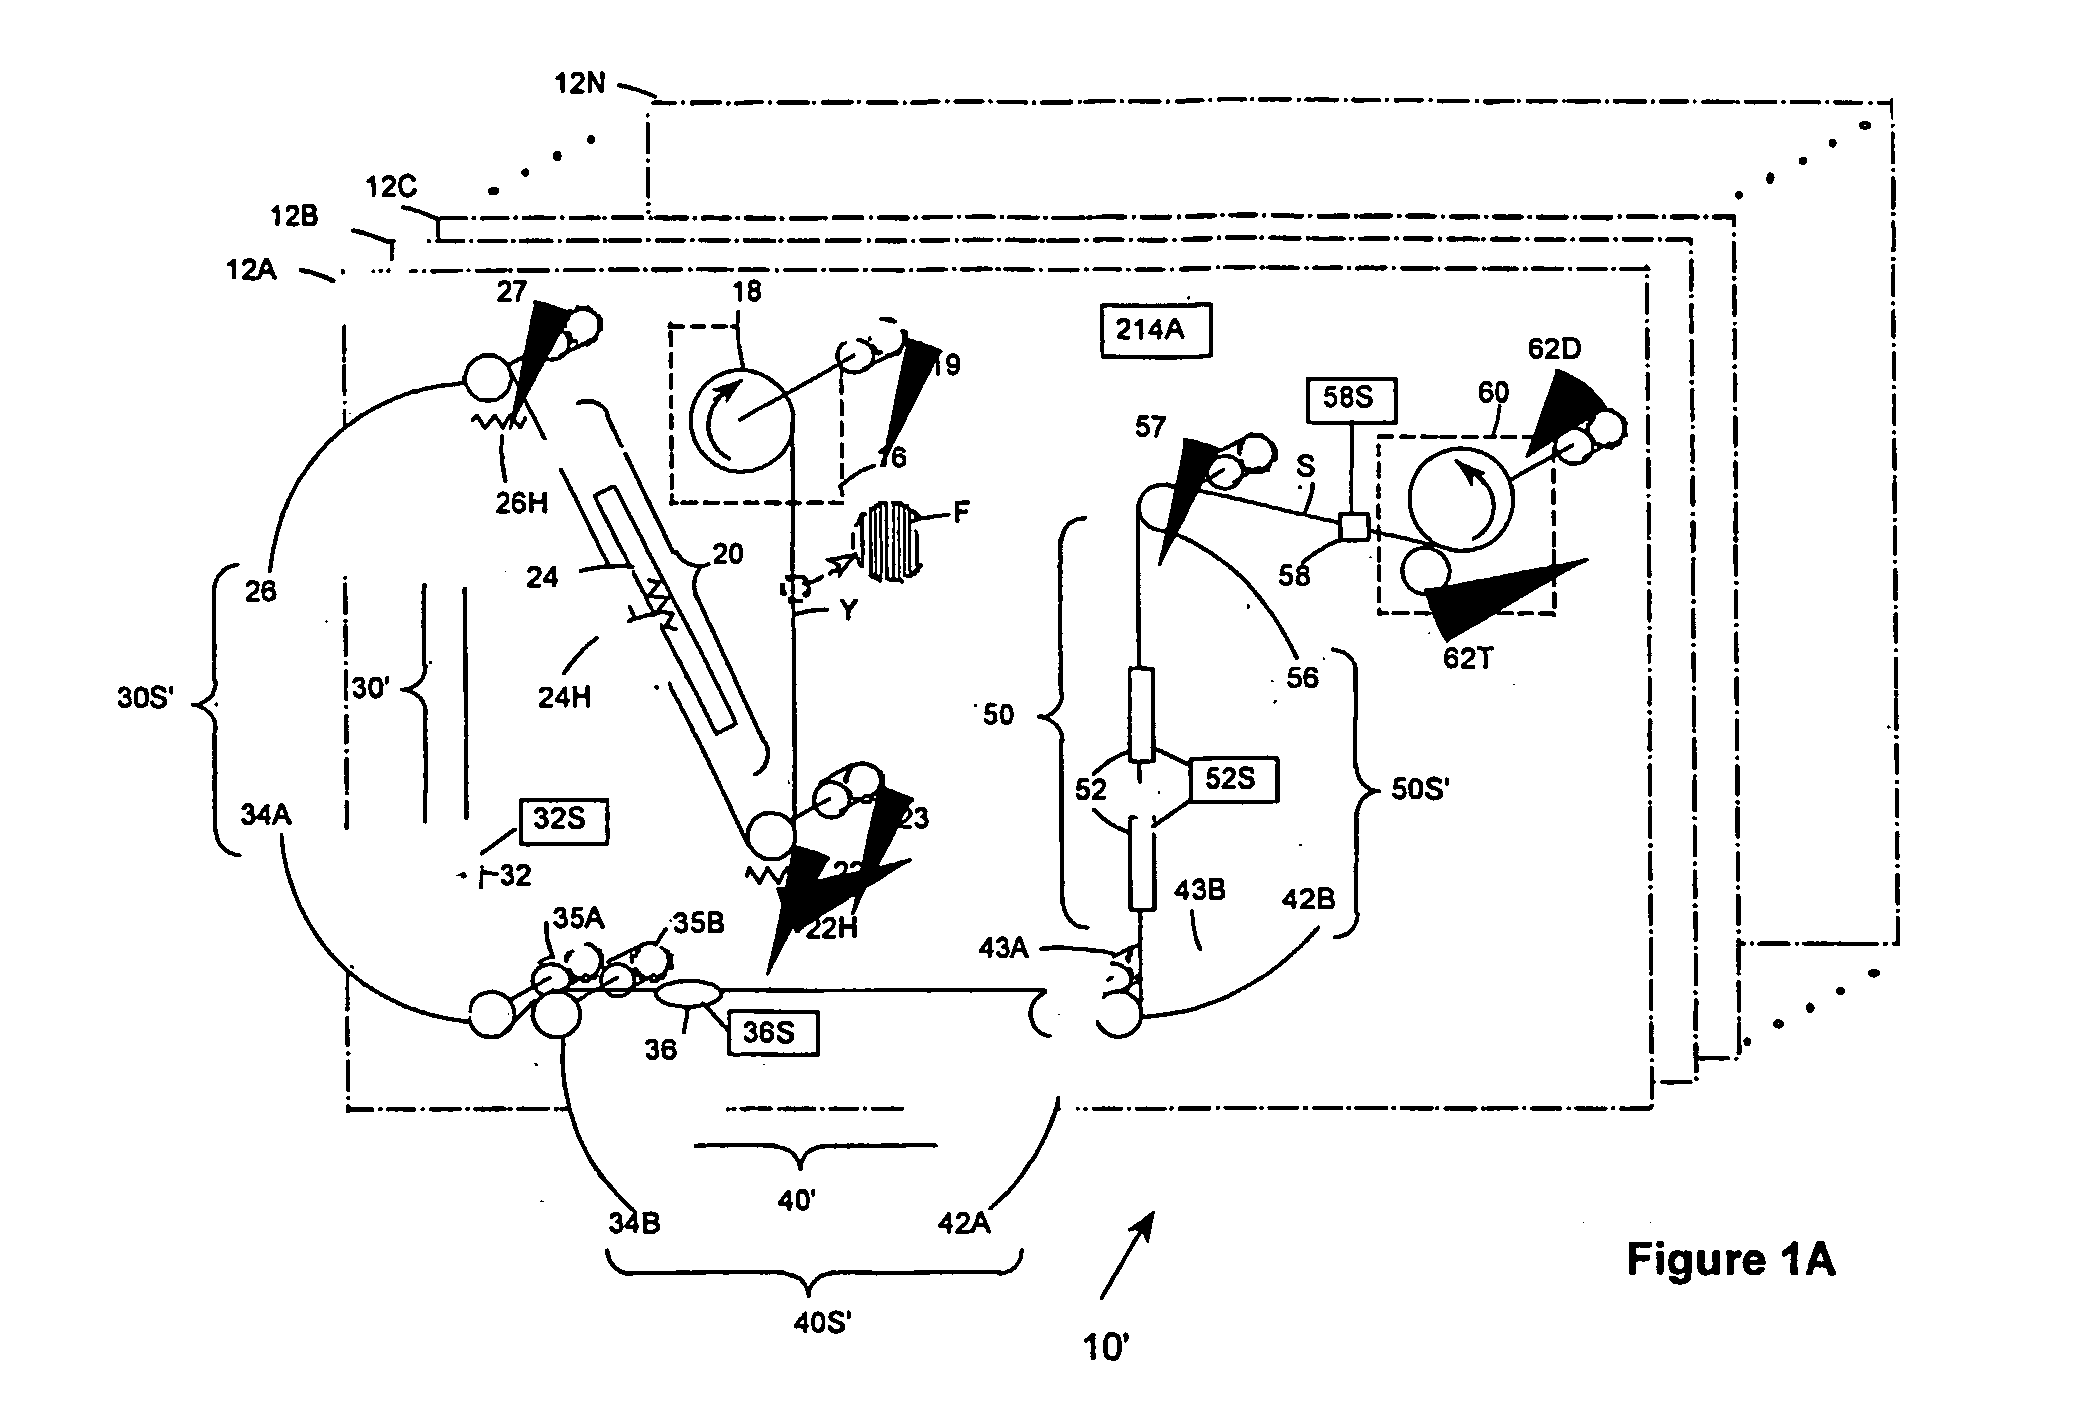 Method for control of yarn processing equipment